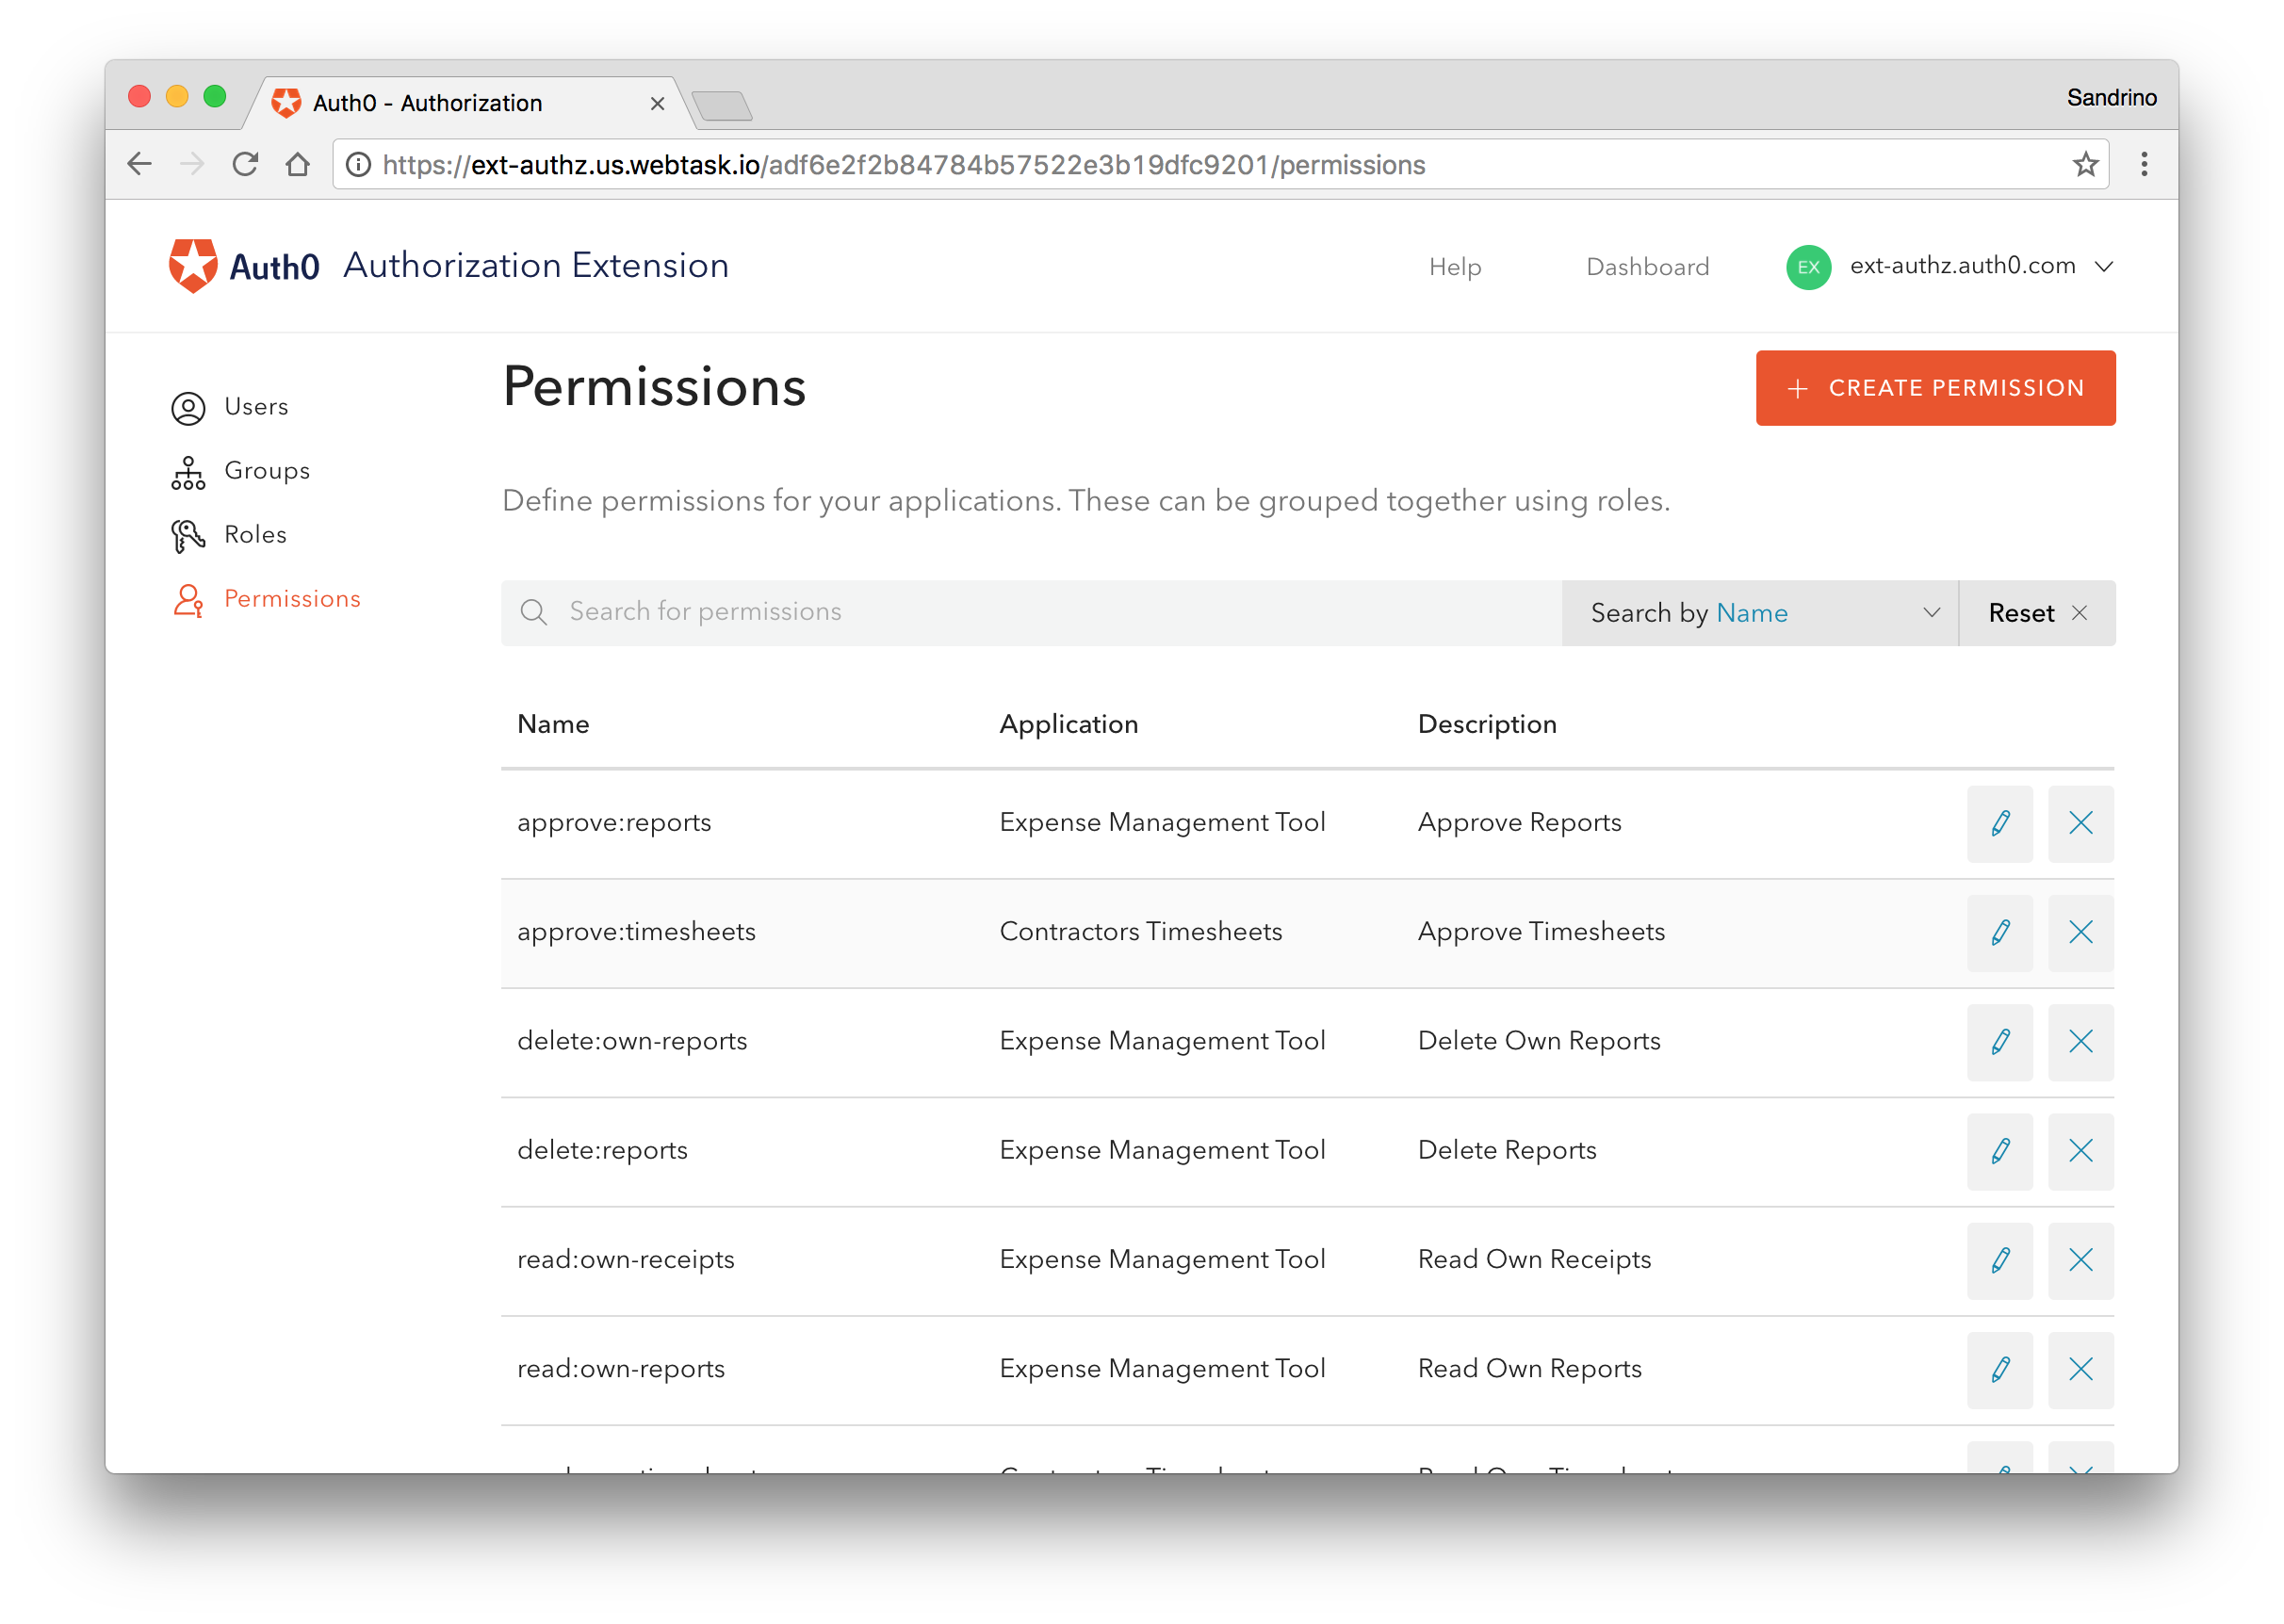 Permissions are granual actions that you can execute within an application